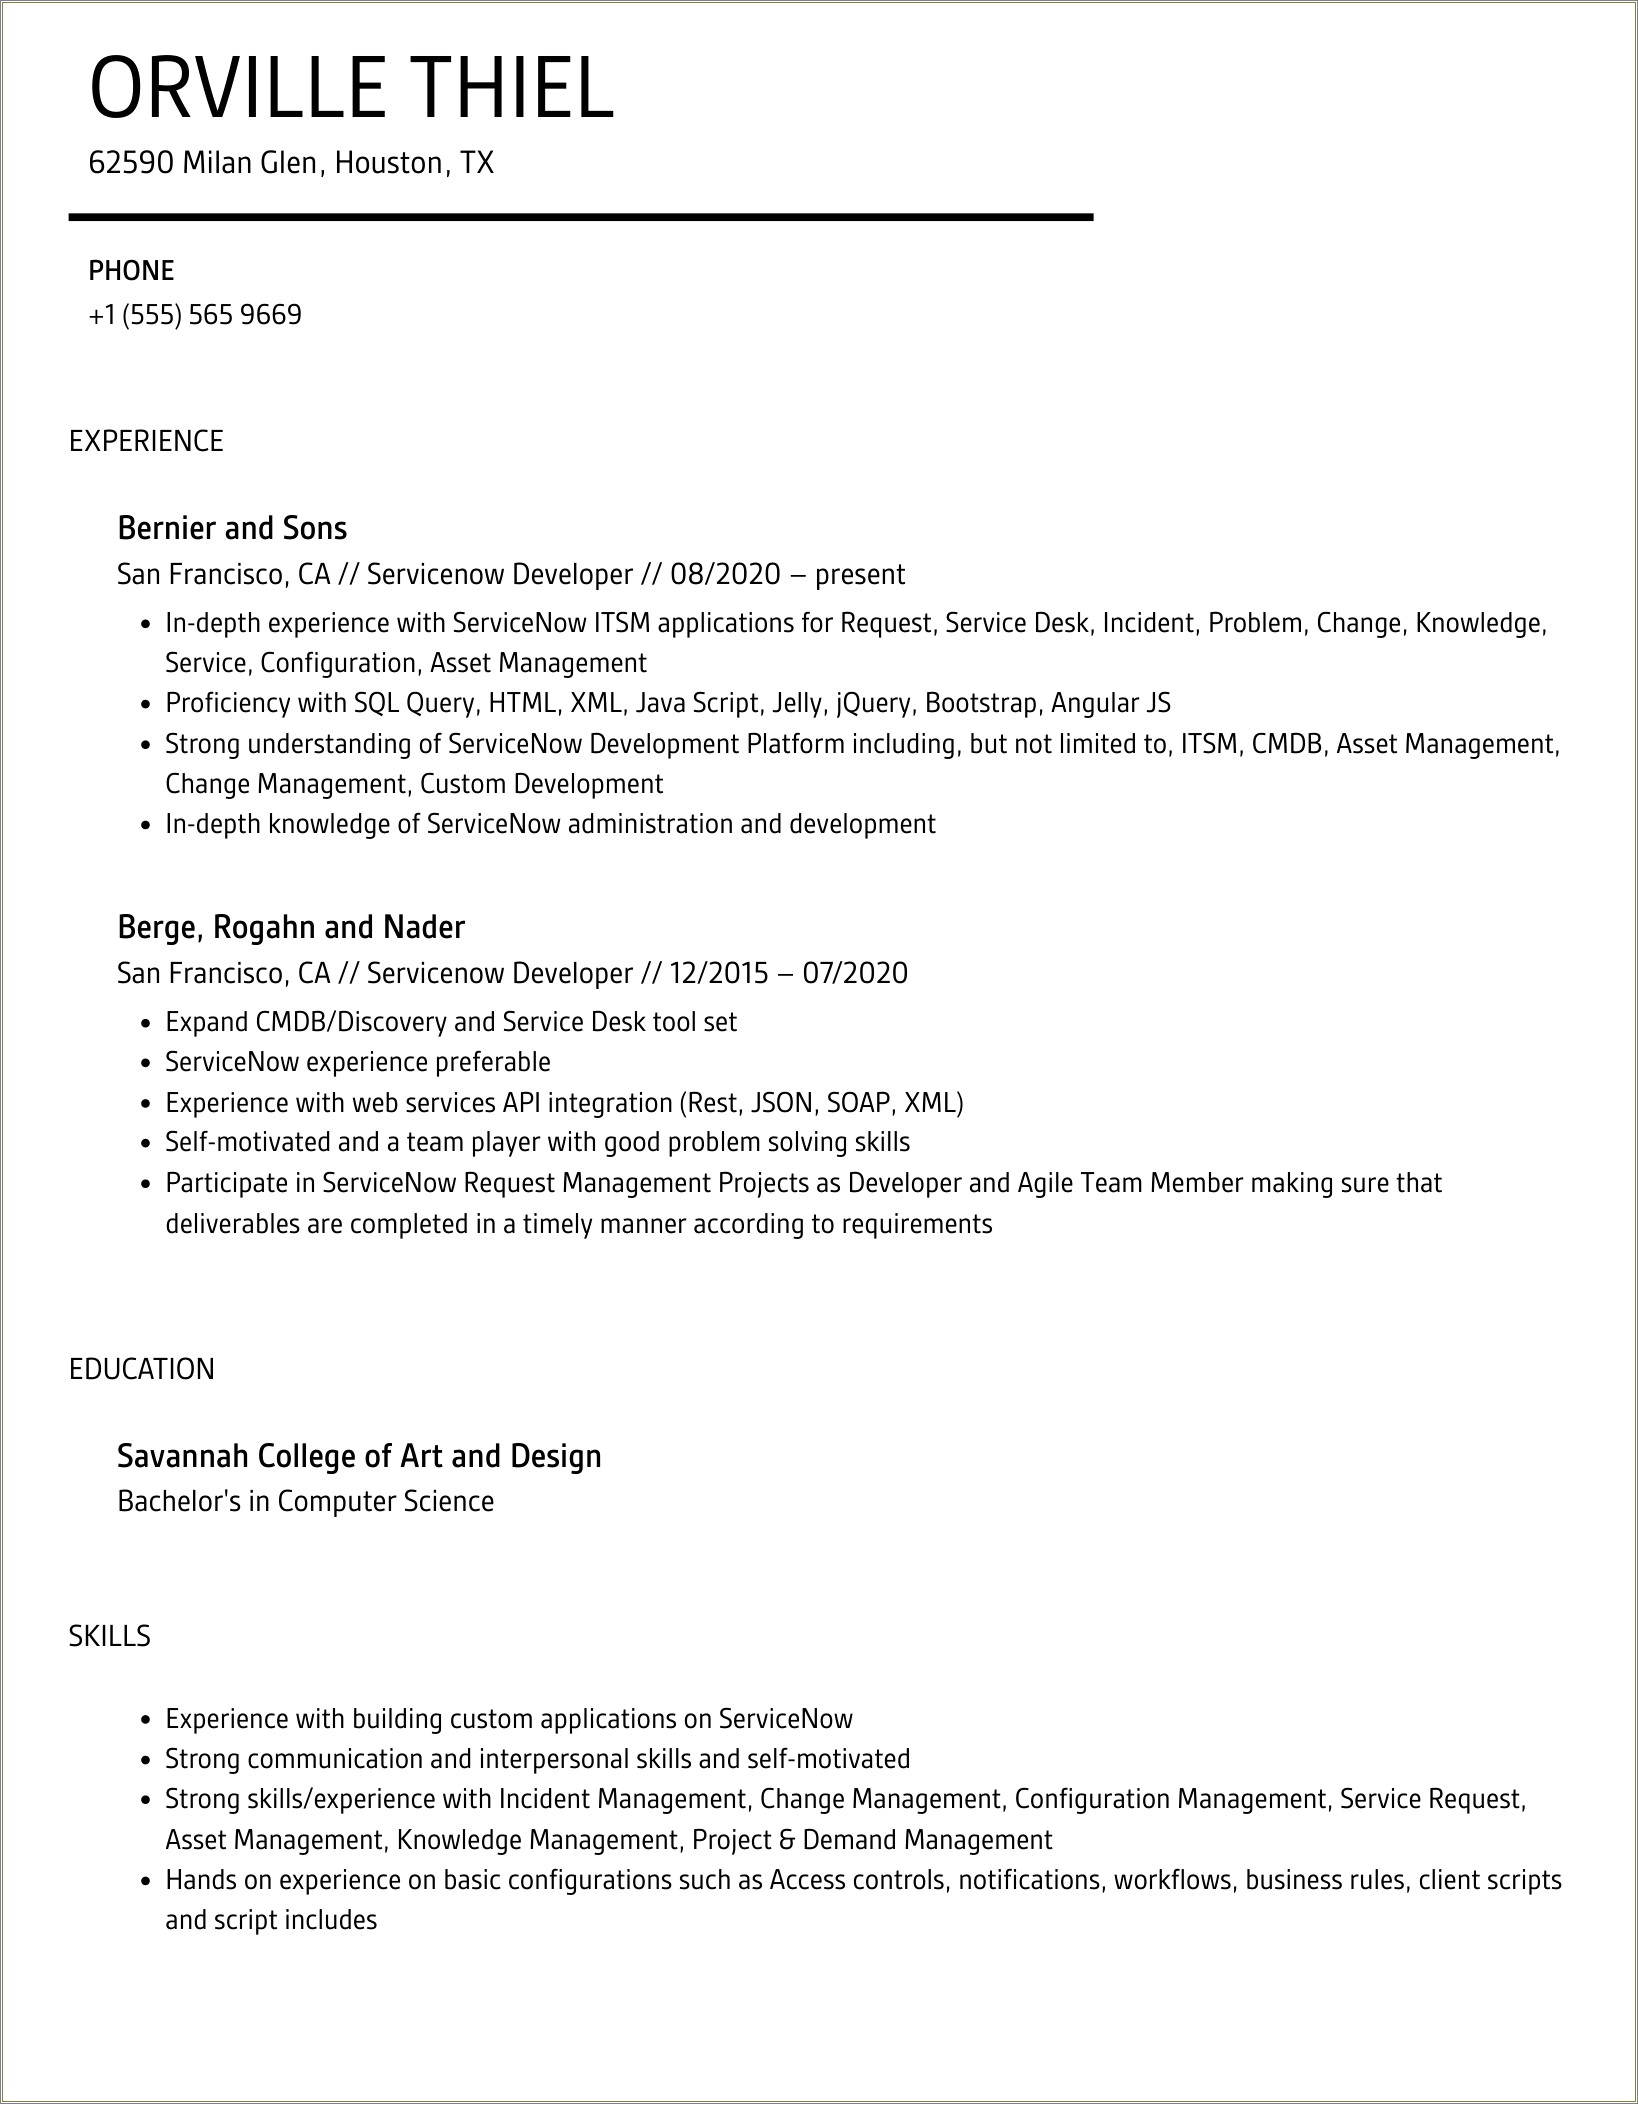 Servicenow Resume With Performance Analytics Experience Hire It